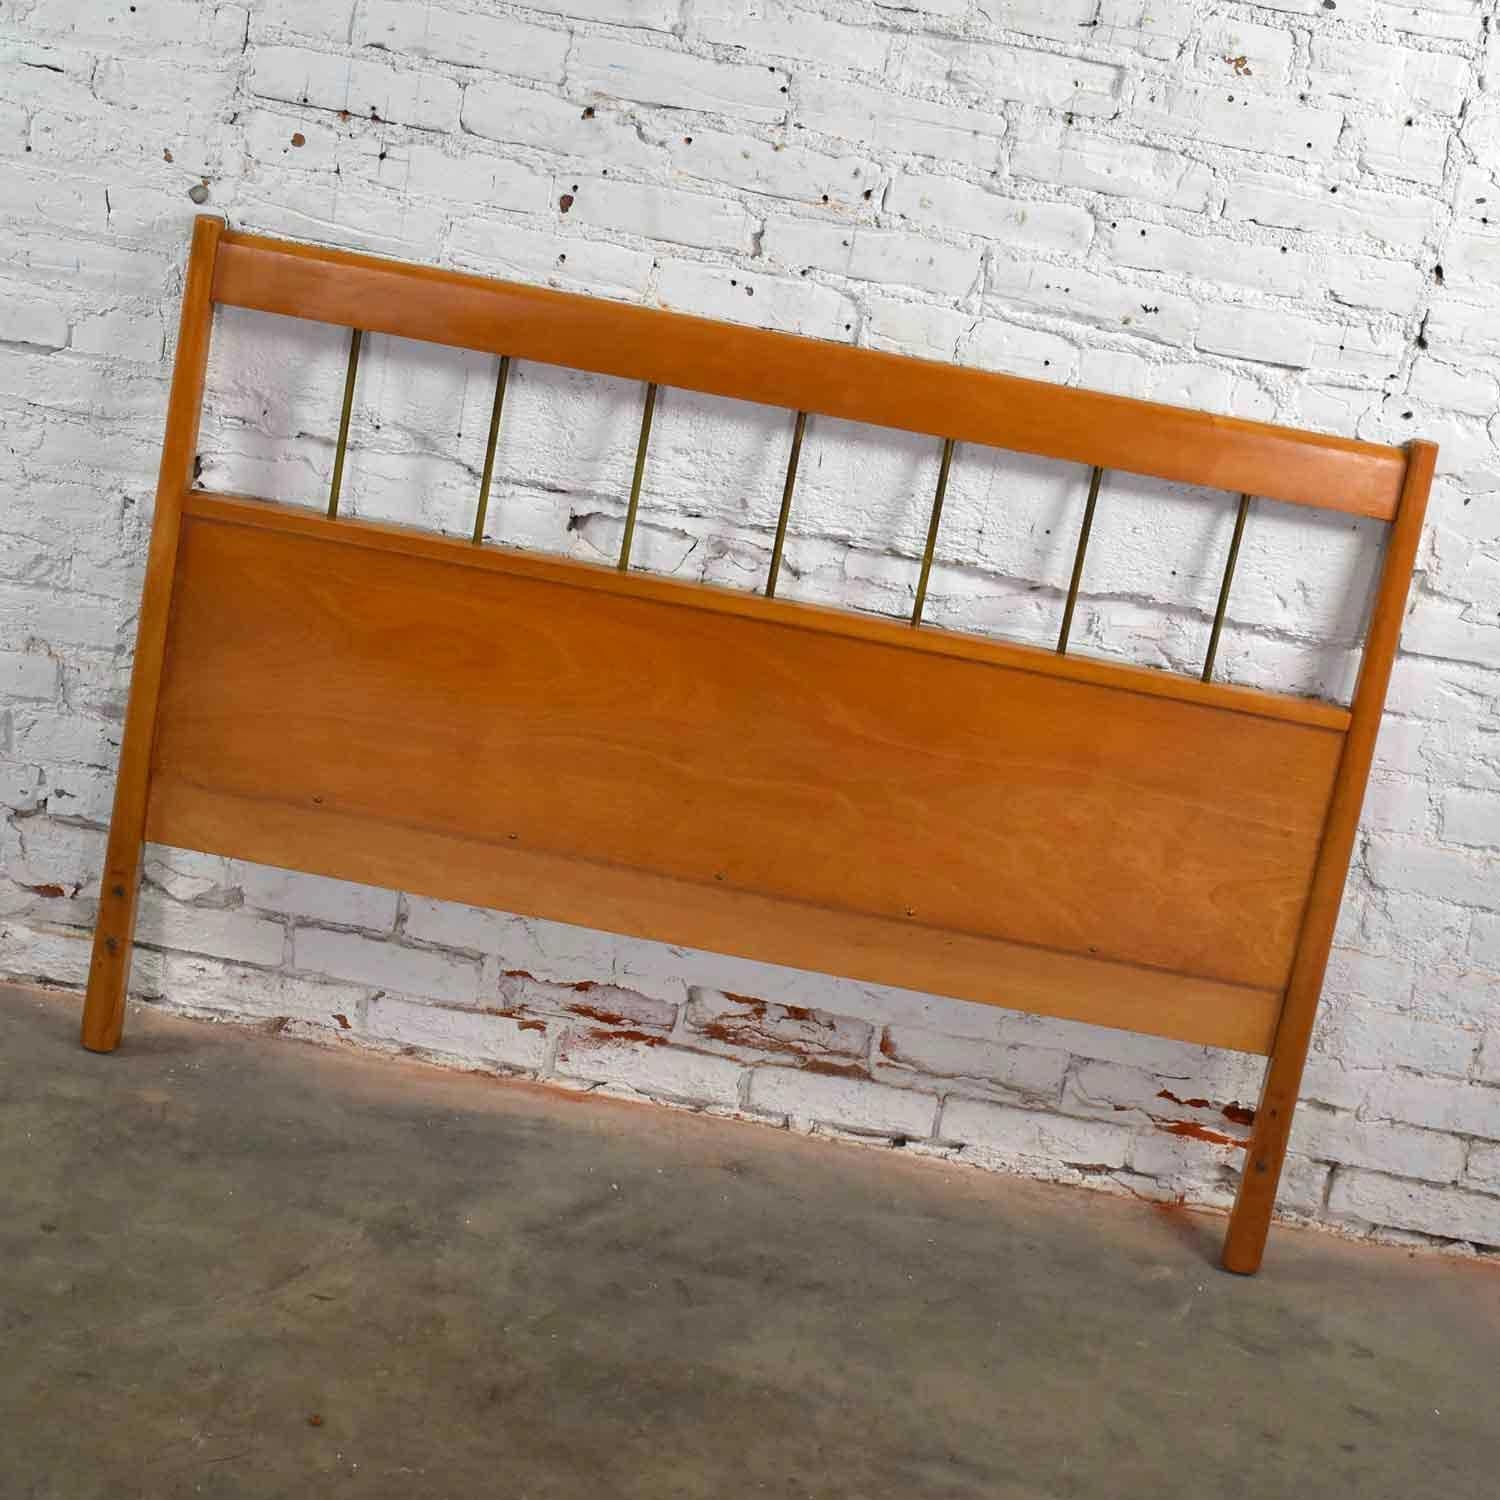 Handsome yet simple full-size headboard from the Planner Group designed by Paul McCobb for Winchendon. It is in fabulous original vintage condition with no outstanding flaws we have detected. Please see photos, circa mid-20th century.

Paul McCobb